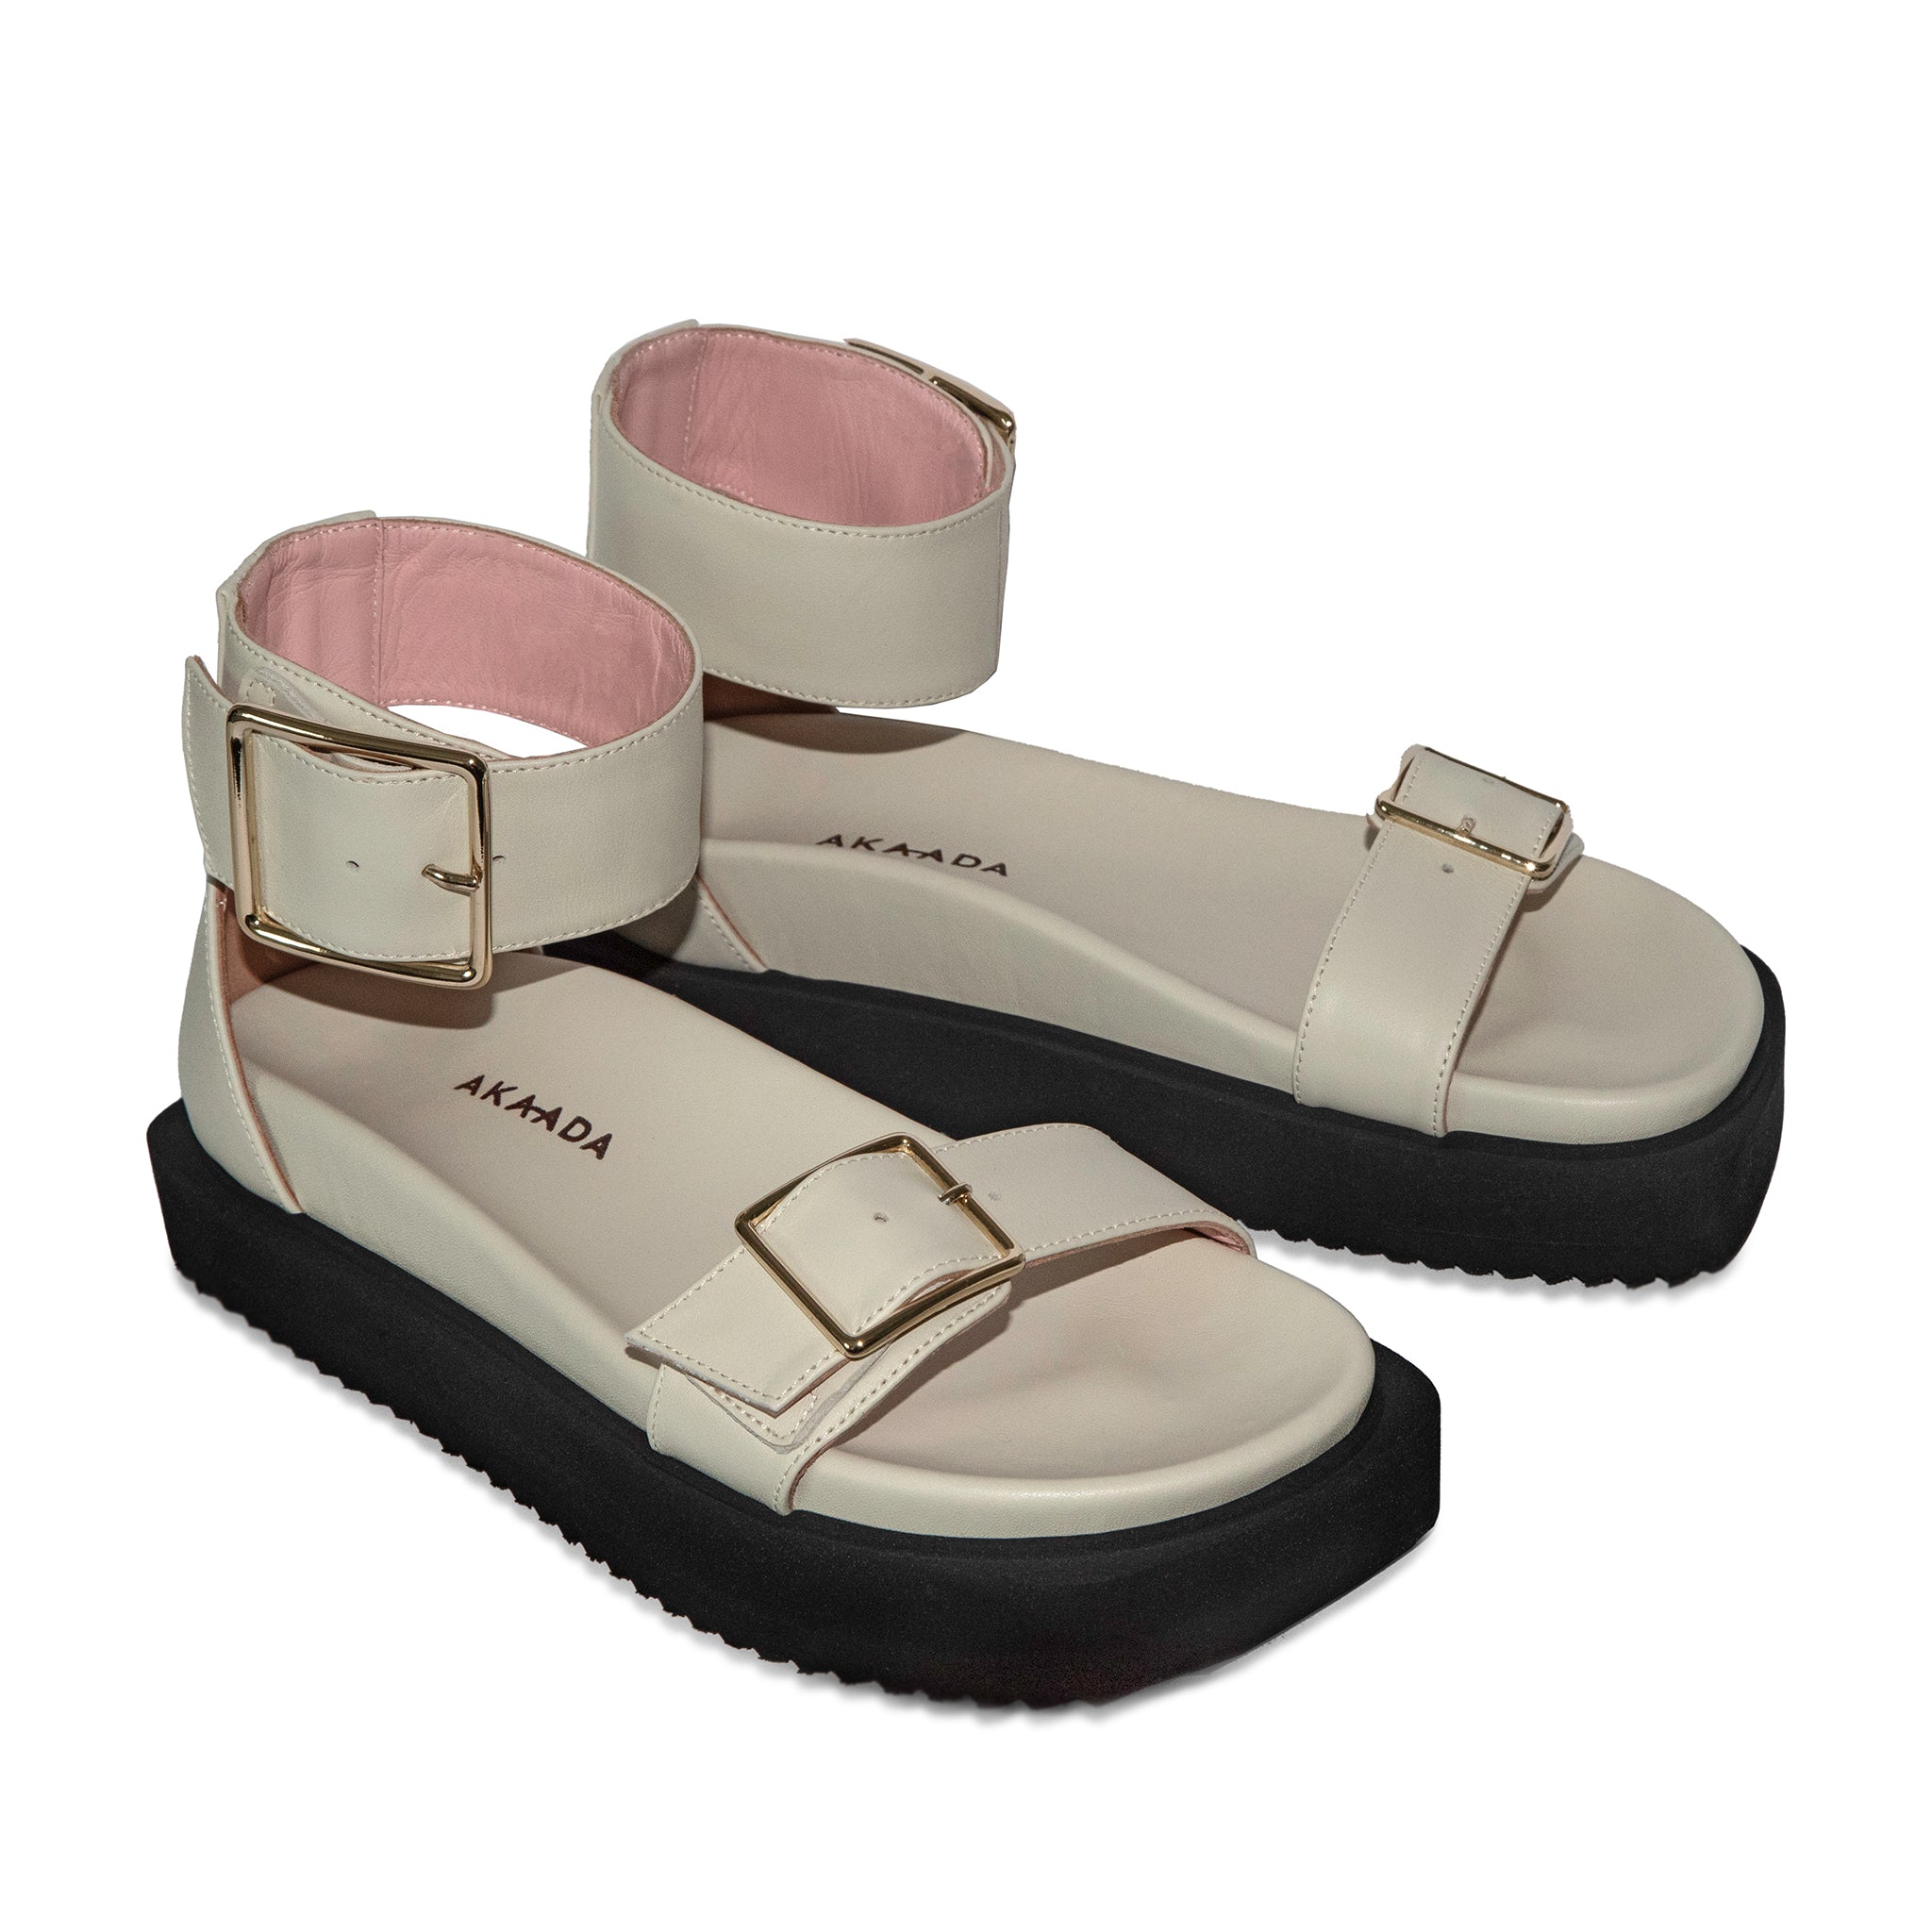 Maru Off White Leather Sandals LES7487-OFFWHITE - 2